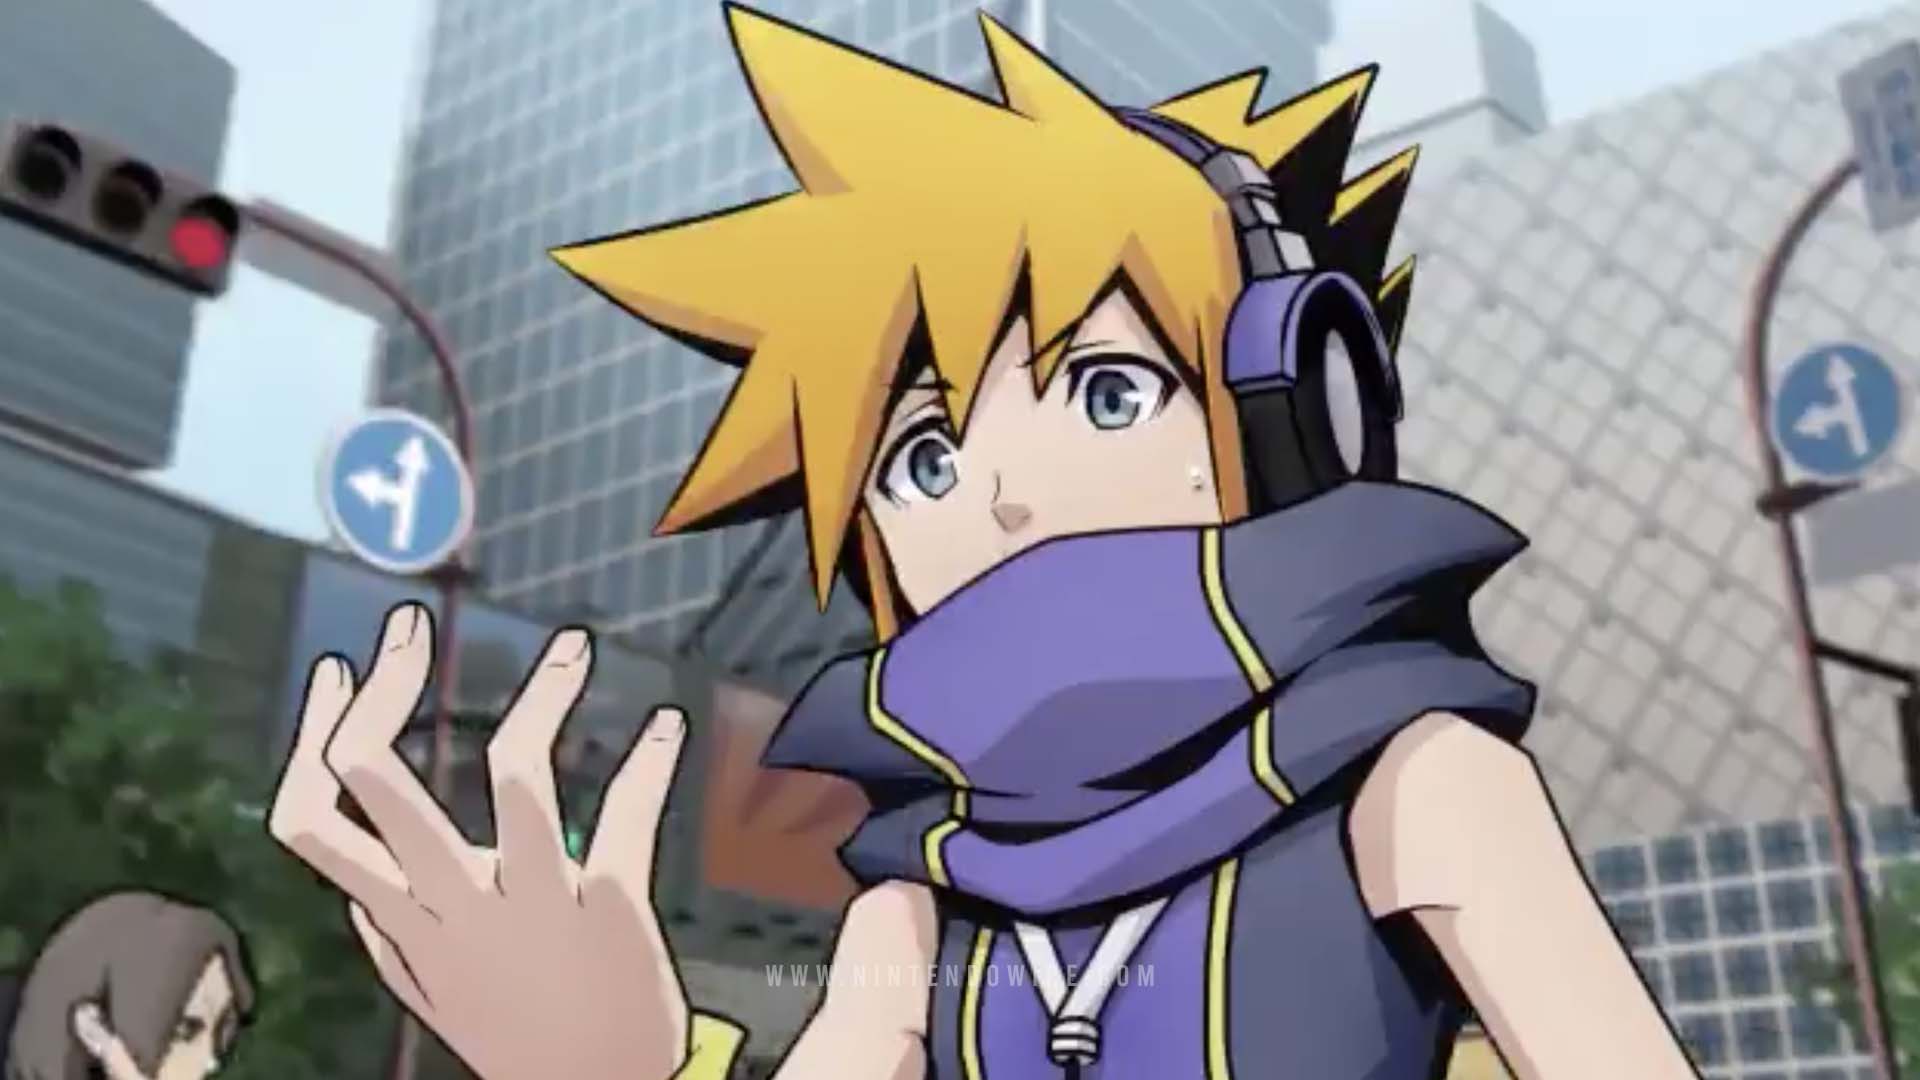 New The World Ends With You anime preview shows Neku ...